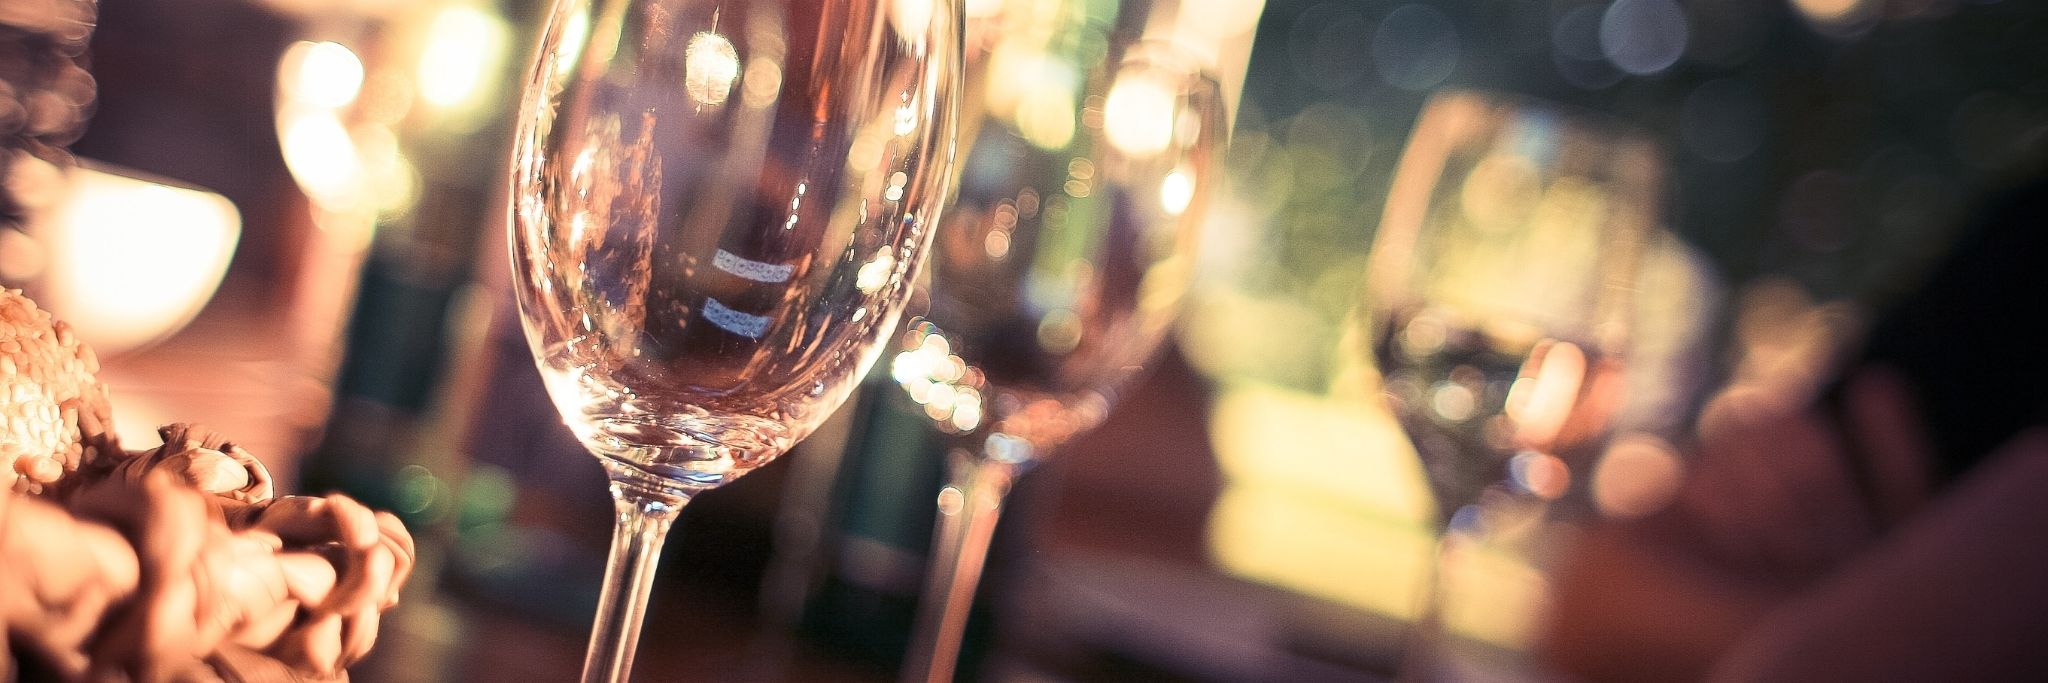 Wine glasses in soft focus on a dinner table